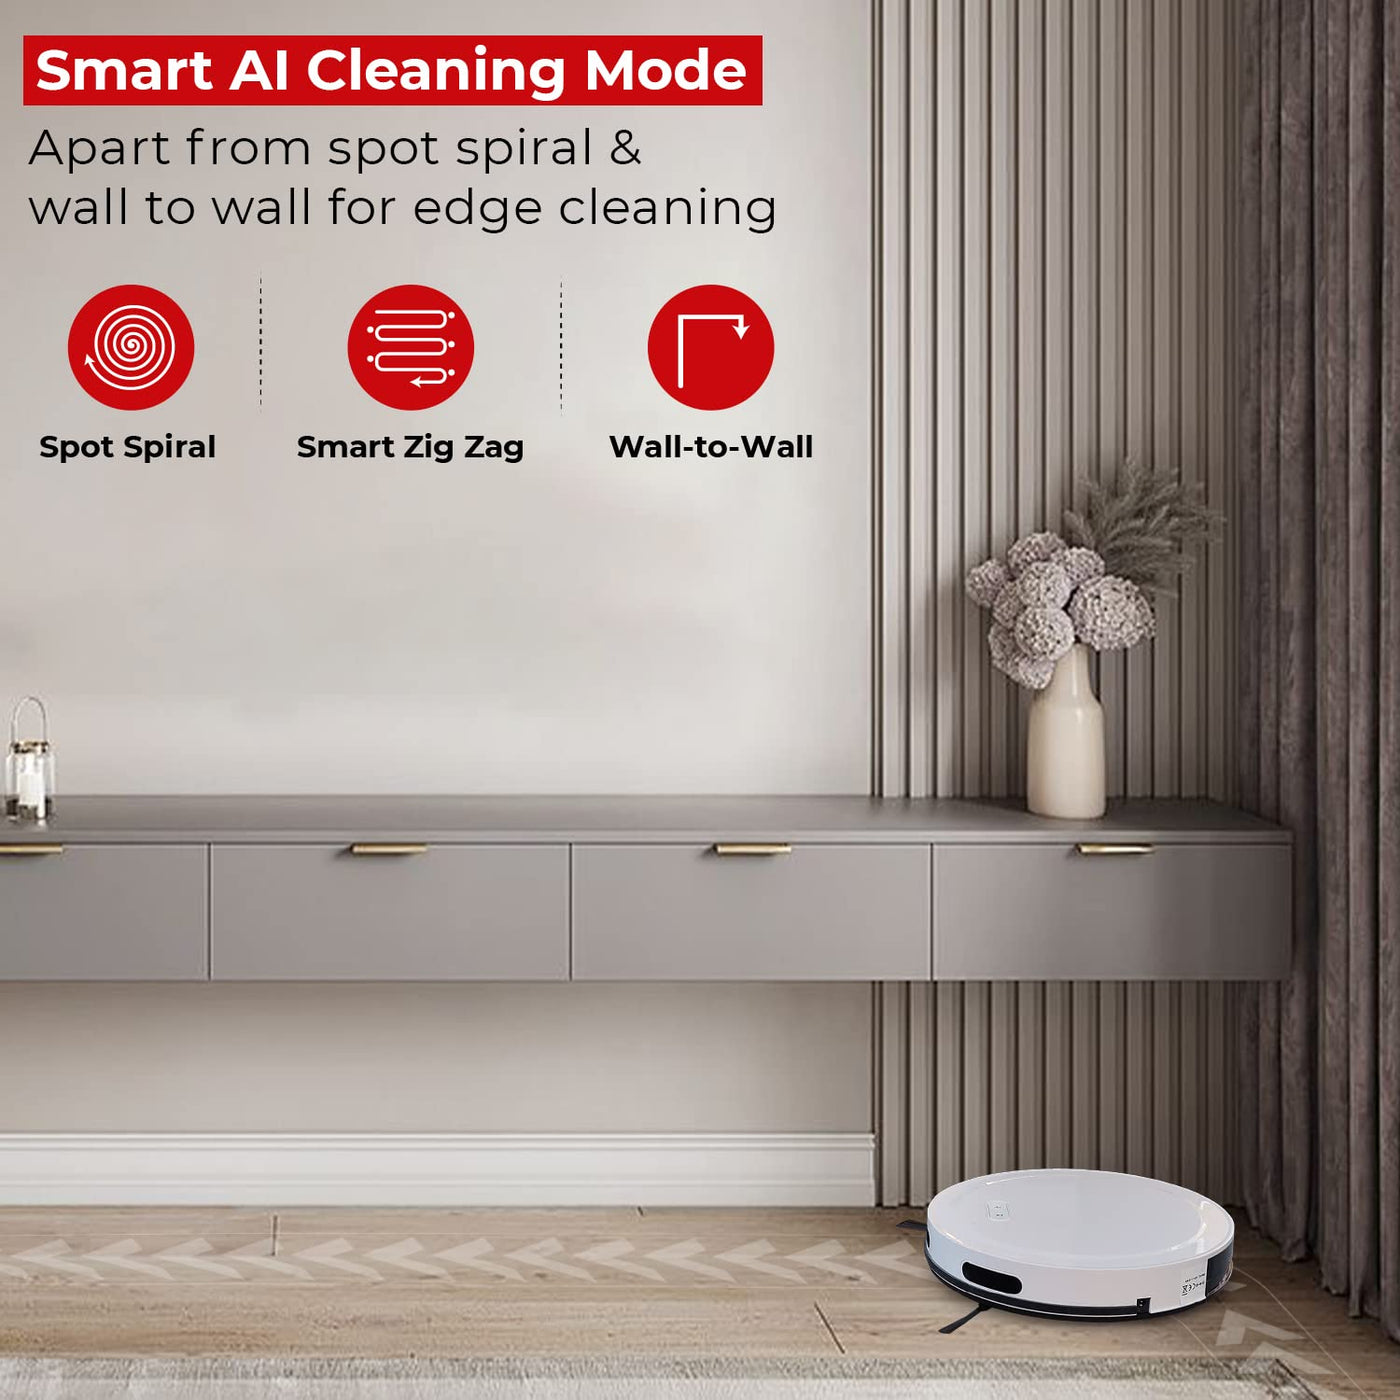 Milagrow Seagull Agua Full Wet & Dry Robotic Vacuum Cleaner, 100ml Water Tank, 1500Pa Auto Boost Suction, Mapping, Scheduling, Self Charge, 3 Cleaning Modes, APP & Remote Control (White)